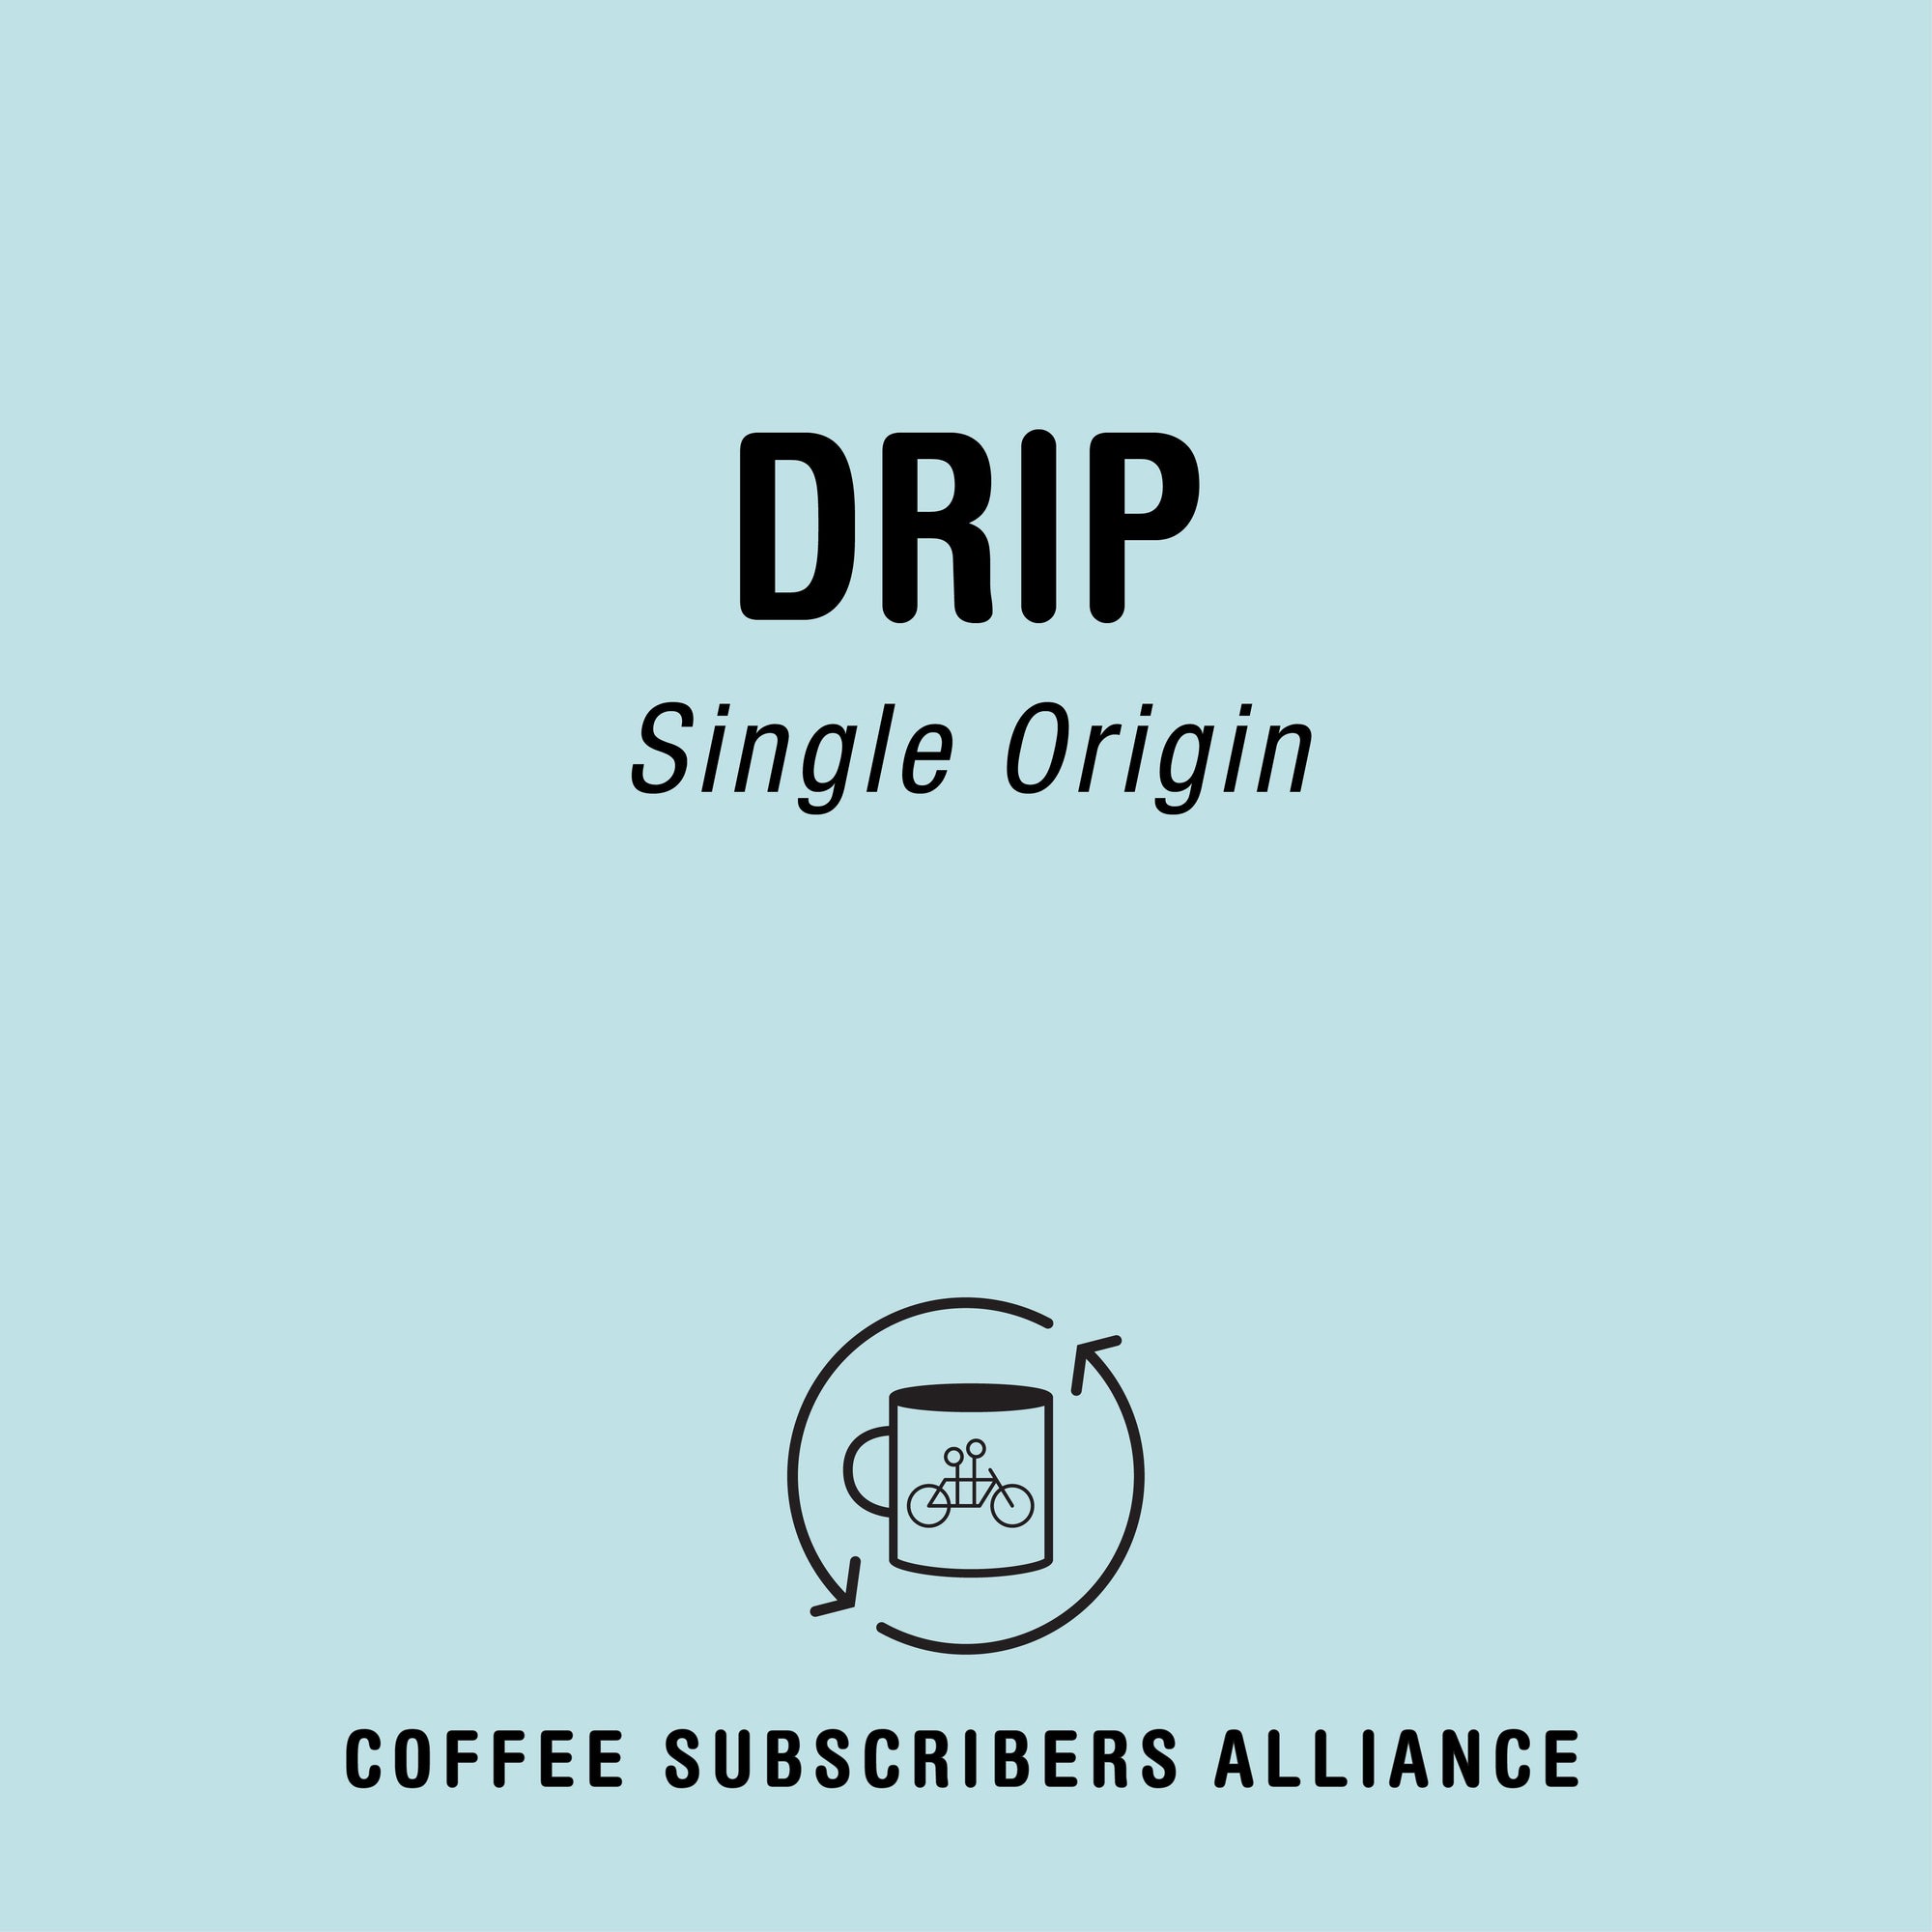 Logo for "Drip Subscription Gift - 1 Week x 6" by Tandem featuring a stylized coffee cup inside a circle with text "coffee subscription" against a pale blue background.